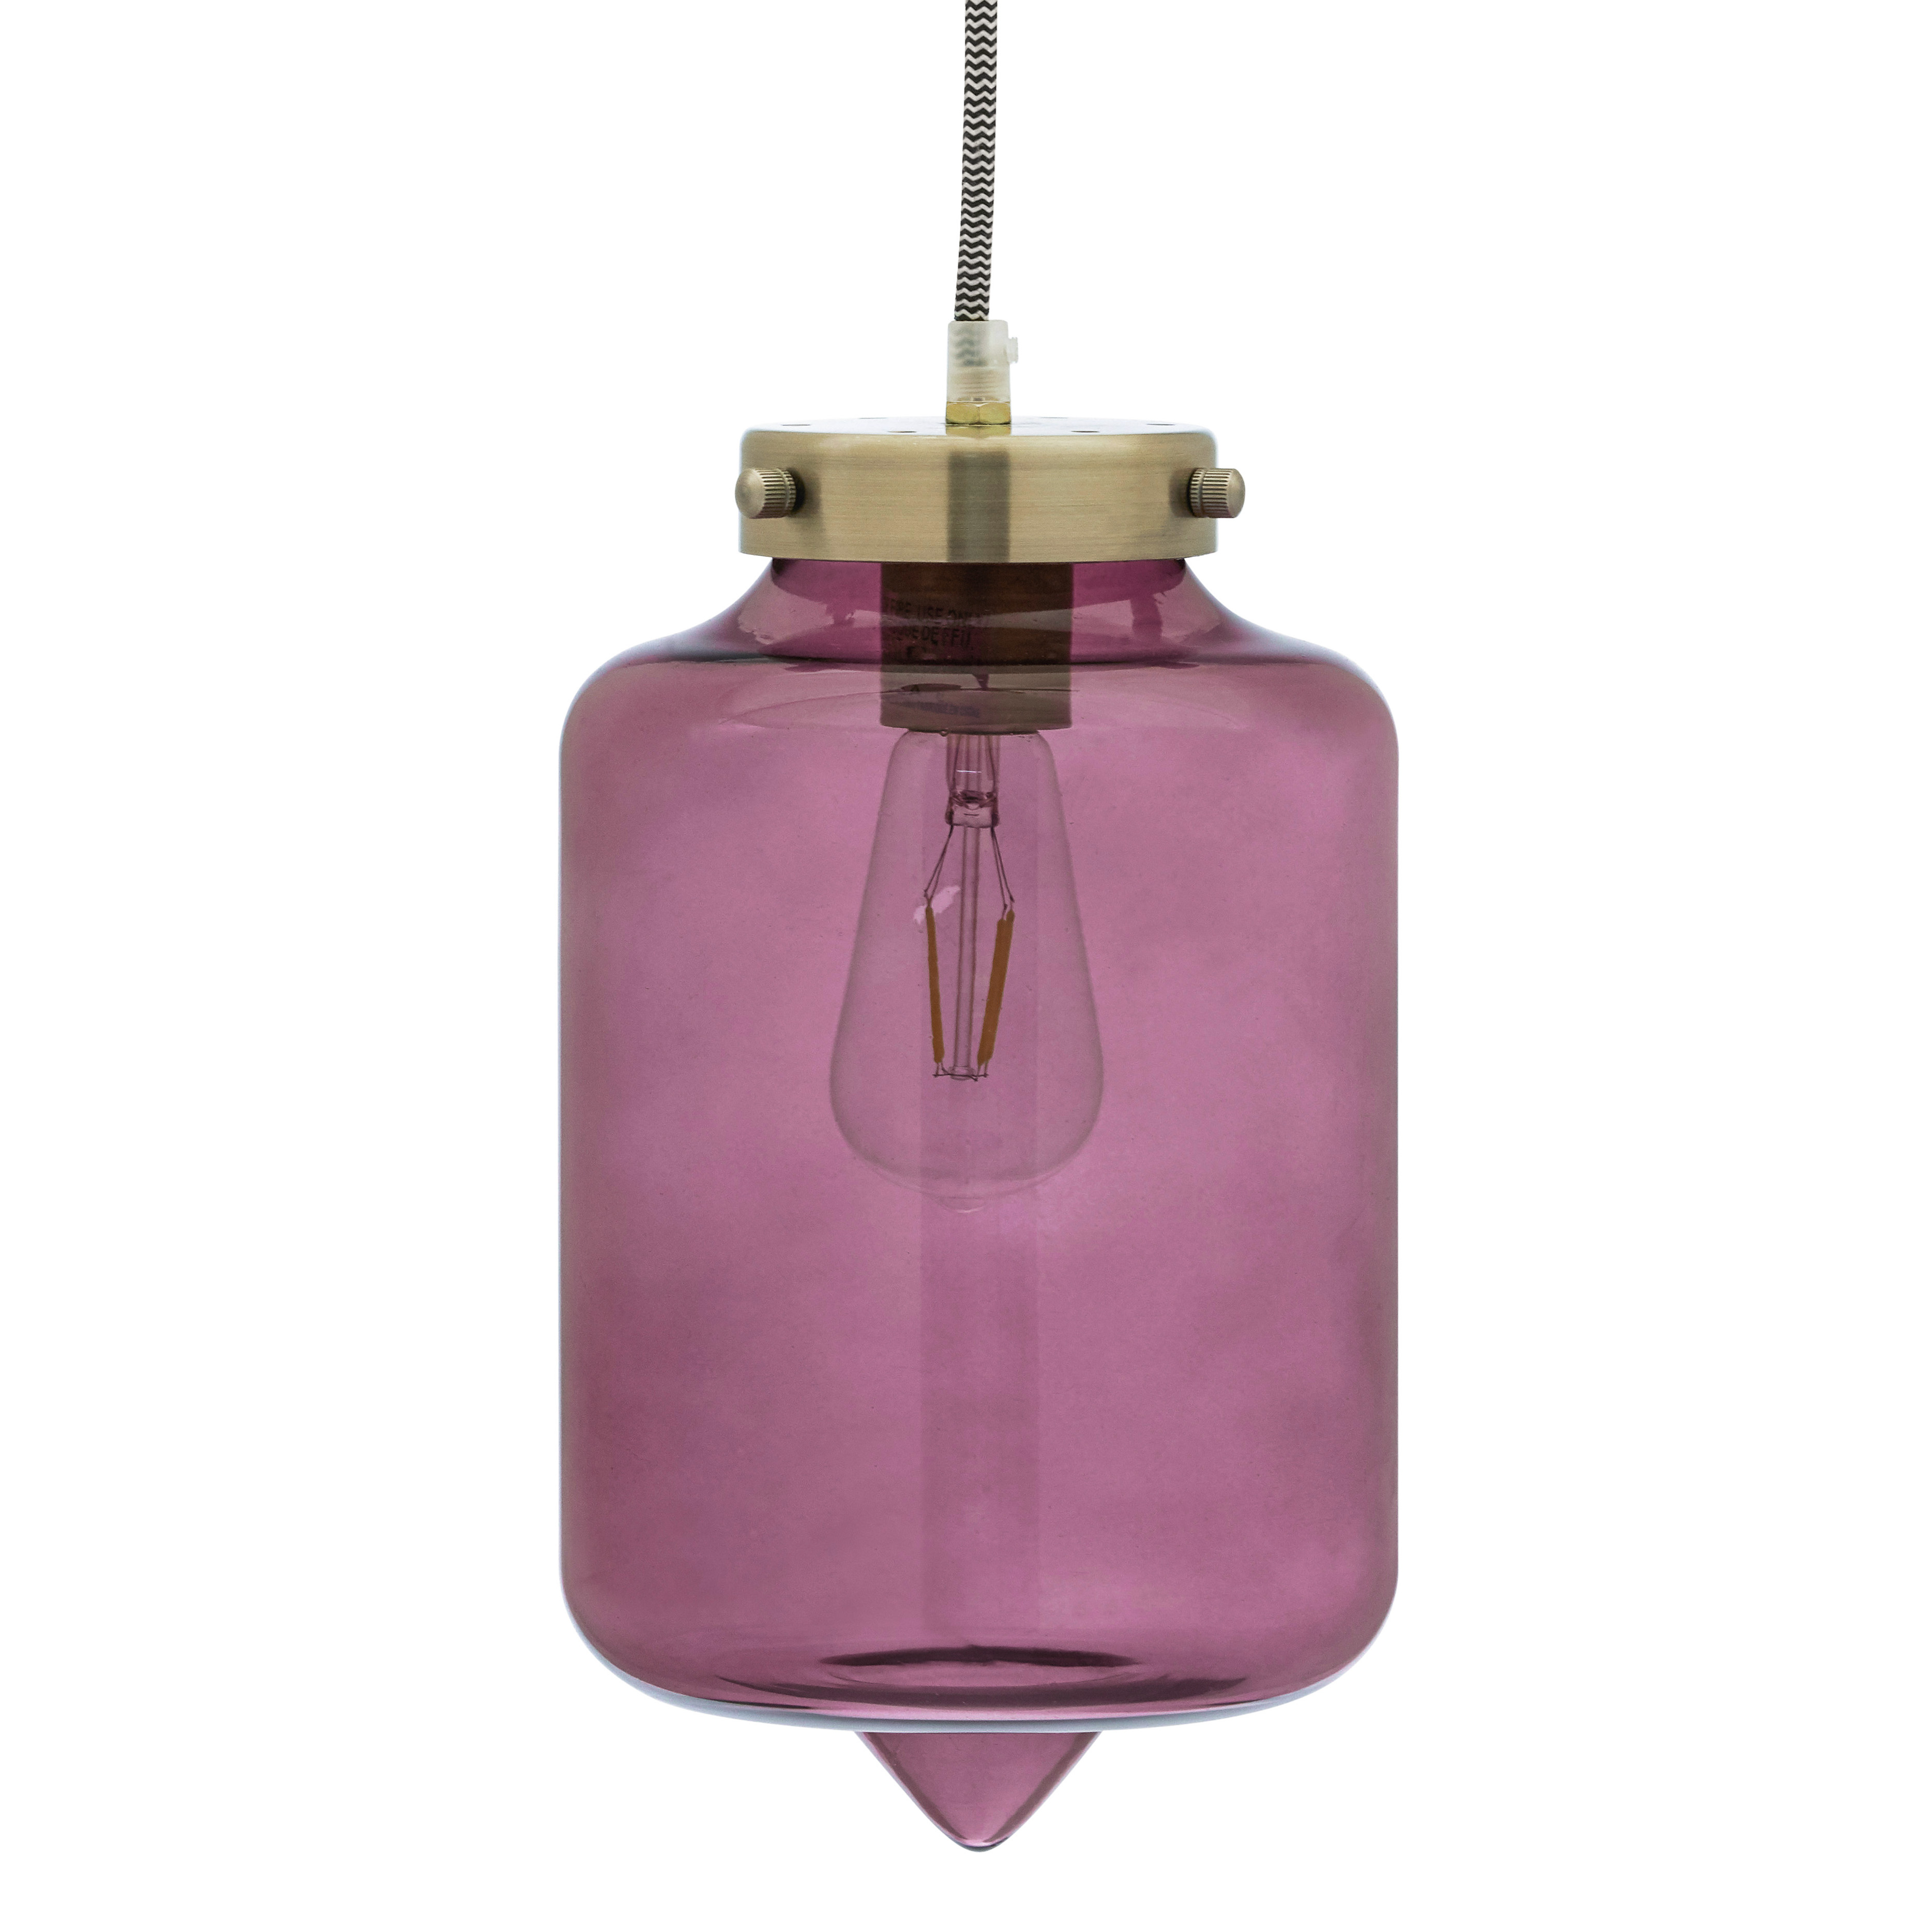 Venetian Wine Cocoon Style Glass Pendant Light by Drew Barrymore Flower Home, UL Listed, LED Bulb Included - image 3 of 9